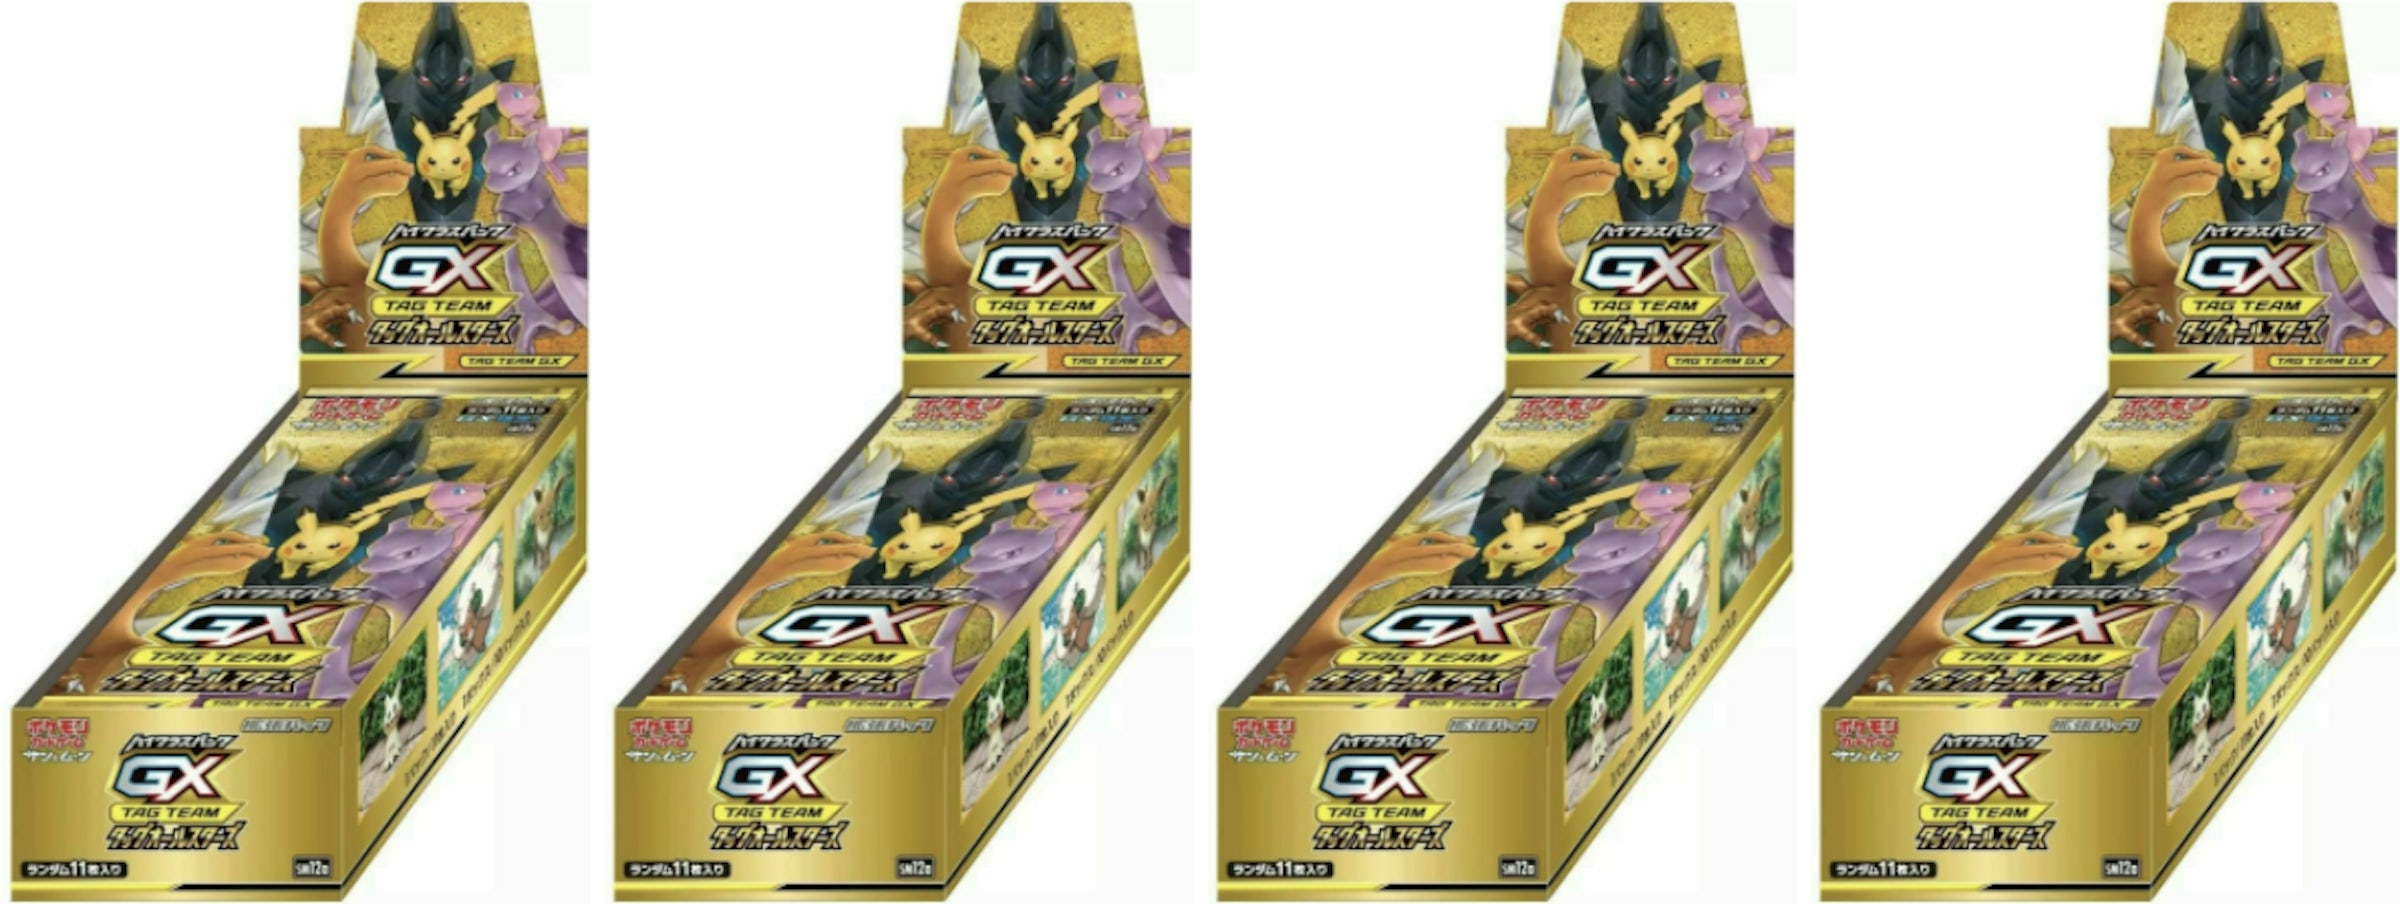 Verified Zekrom - Vmax Climax by Pokemon Cards